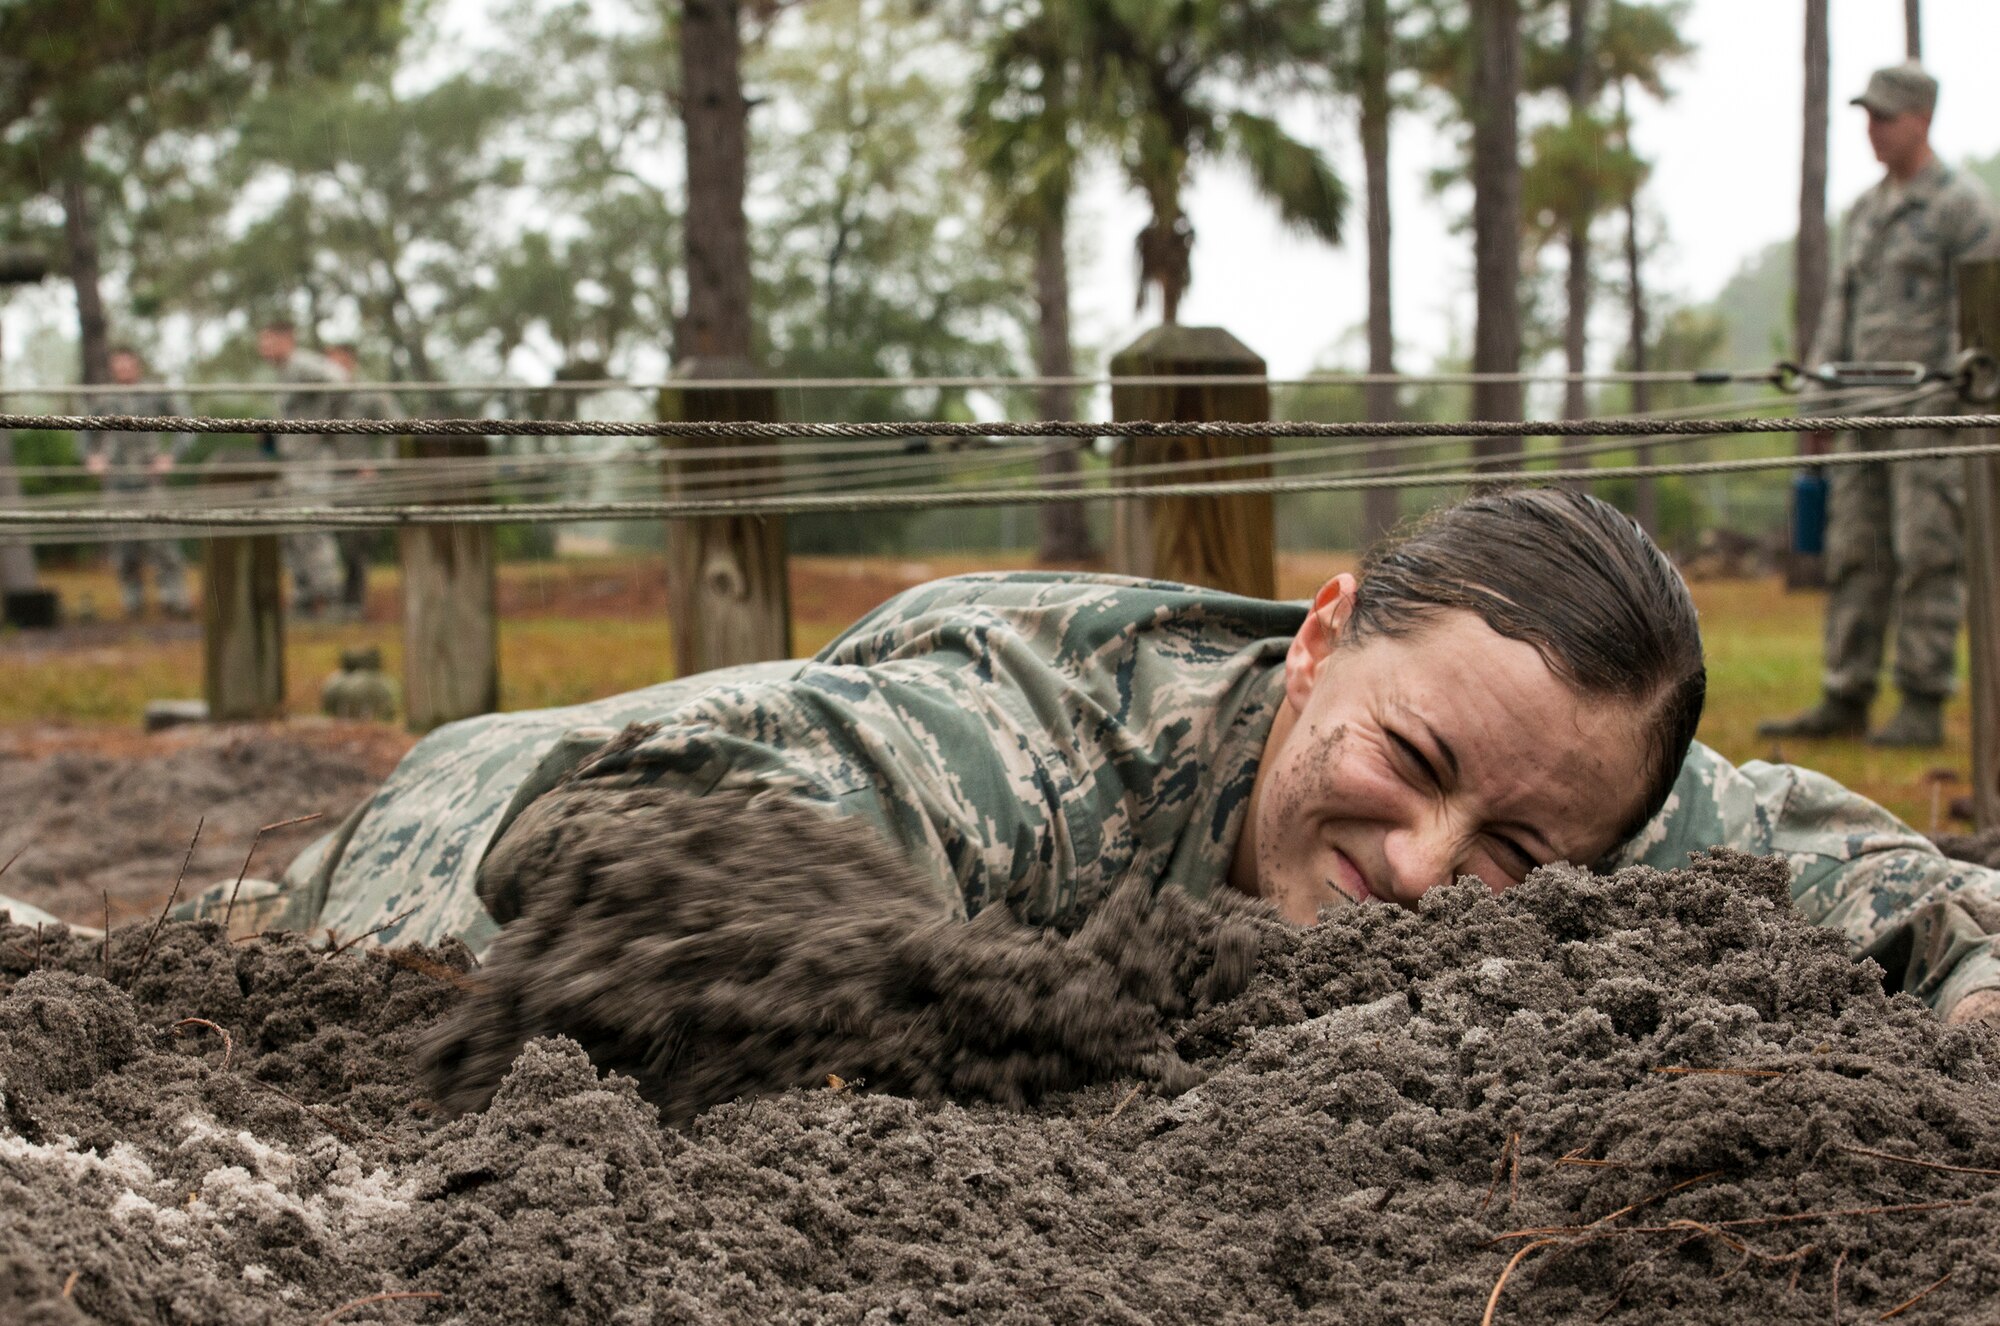 U.S. Air Force 2nd Lt. Lizette Wu, 820th Base Defense Group, low crawls through mud as part of an obstacle course during an air assault assessment, Dec. 15, 2015, at Camp Blanding, Fla. Airmen had to crawl through the mud without letting any part of their body touch the metal wires hung above. (U.S. Air Force photo by Airman 1st Class Lauren M. Johnson/Released)